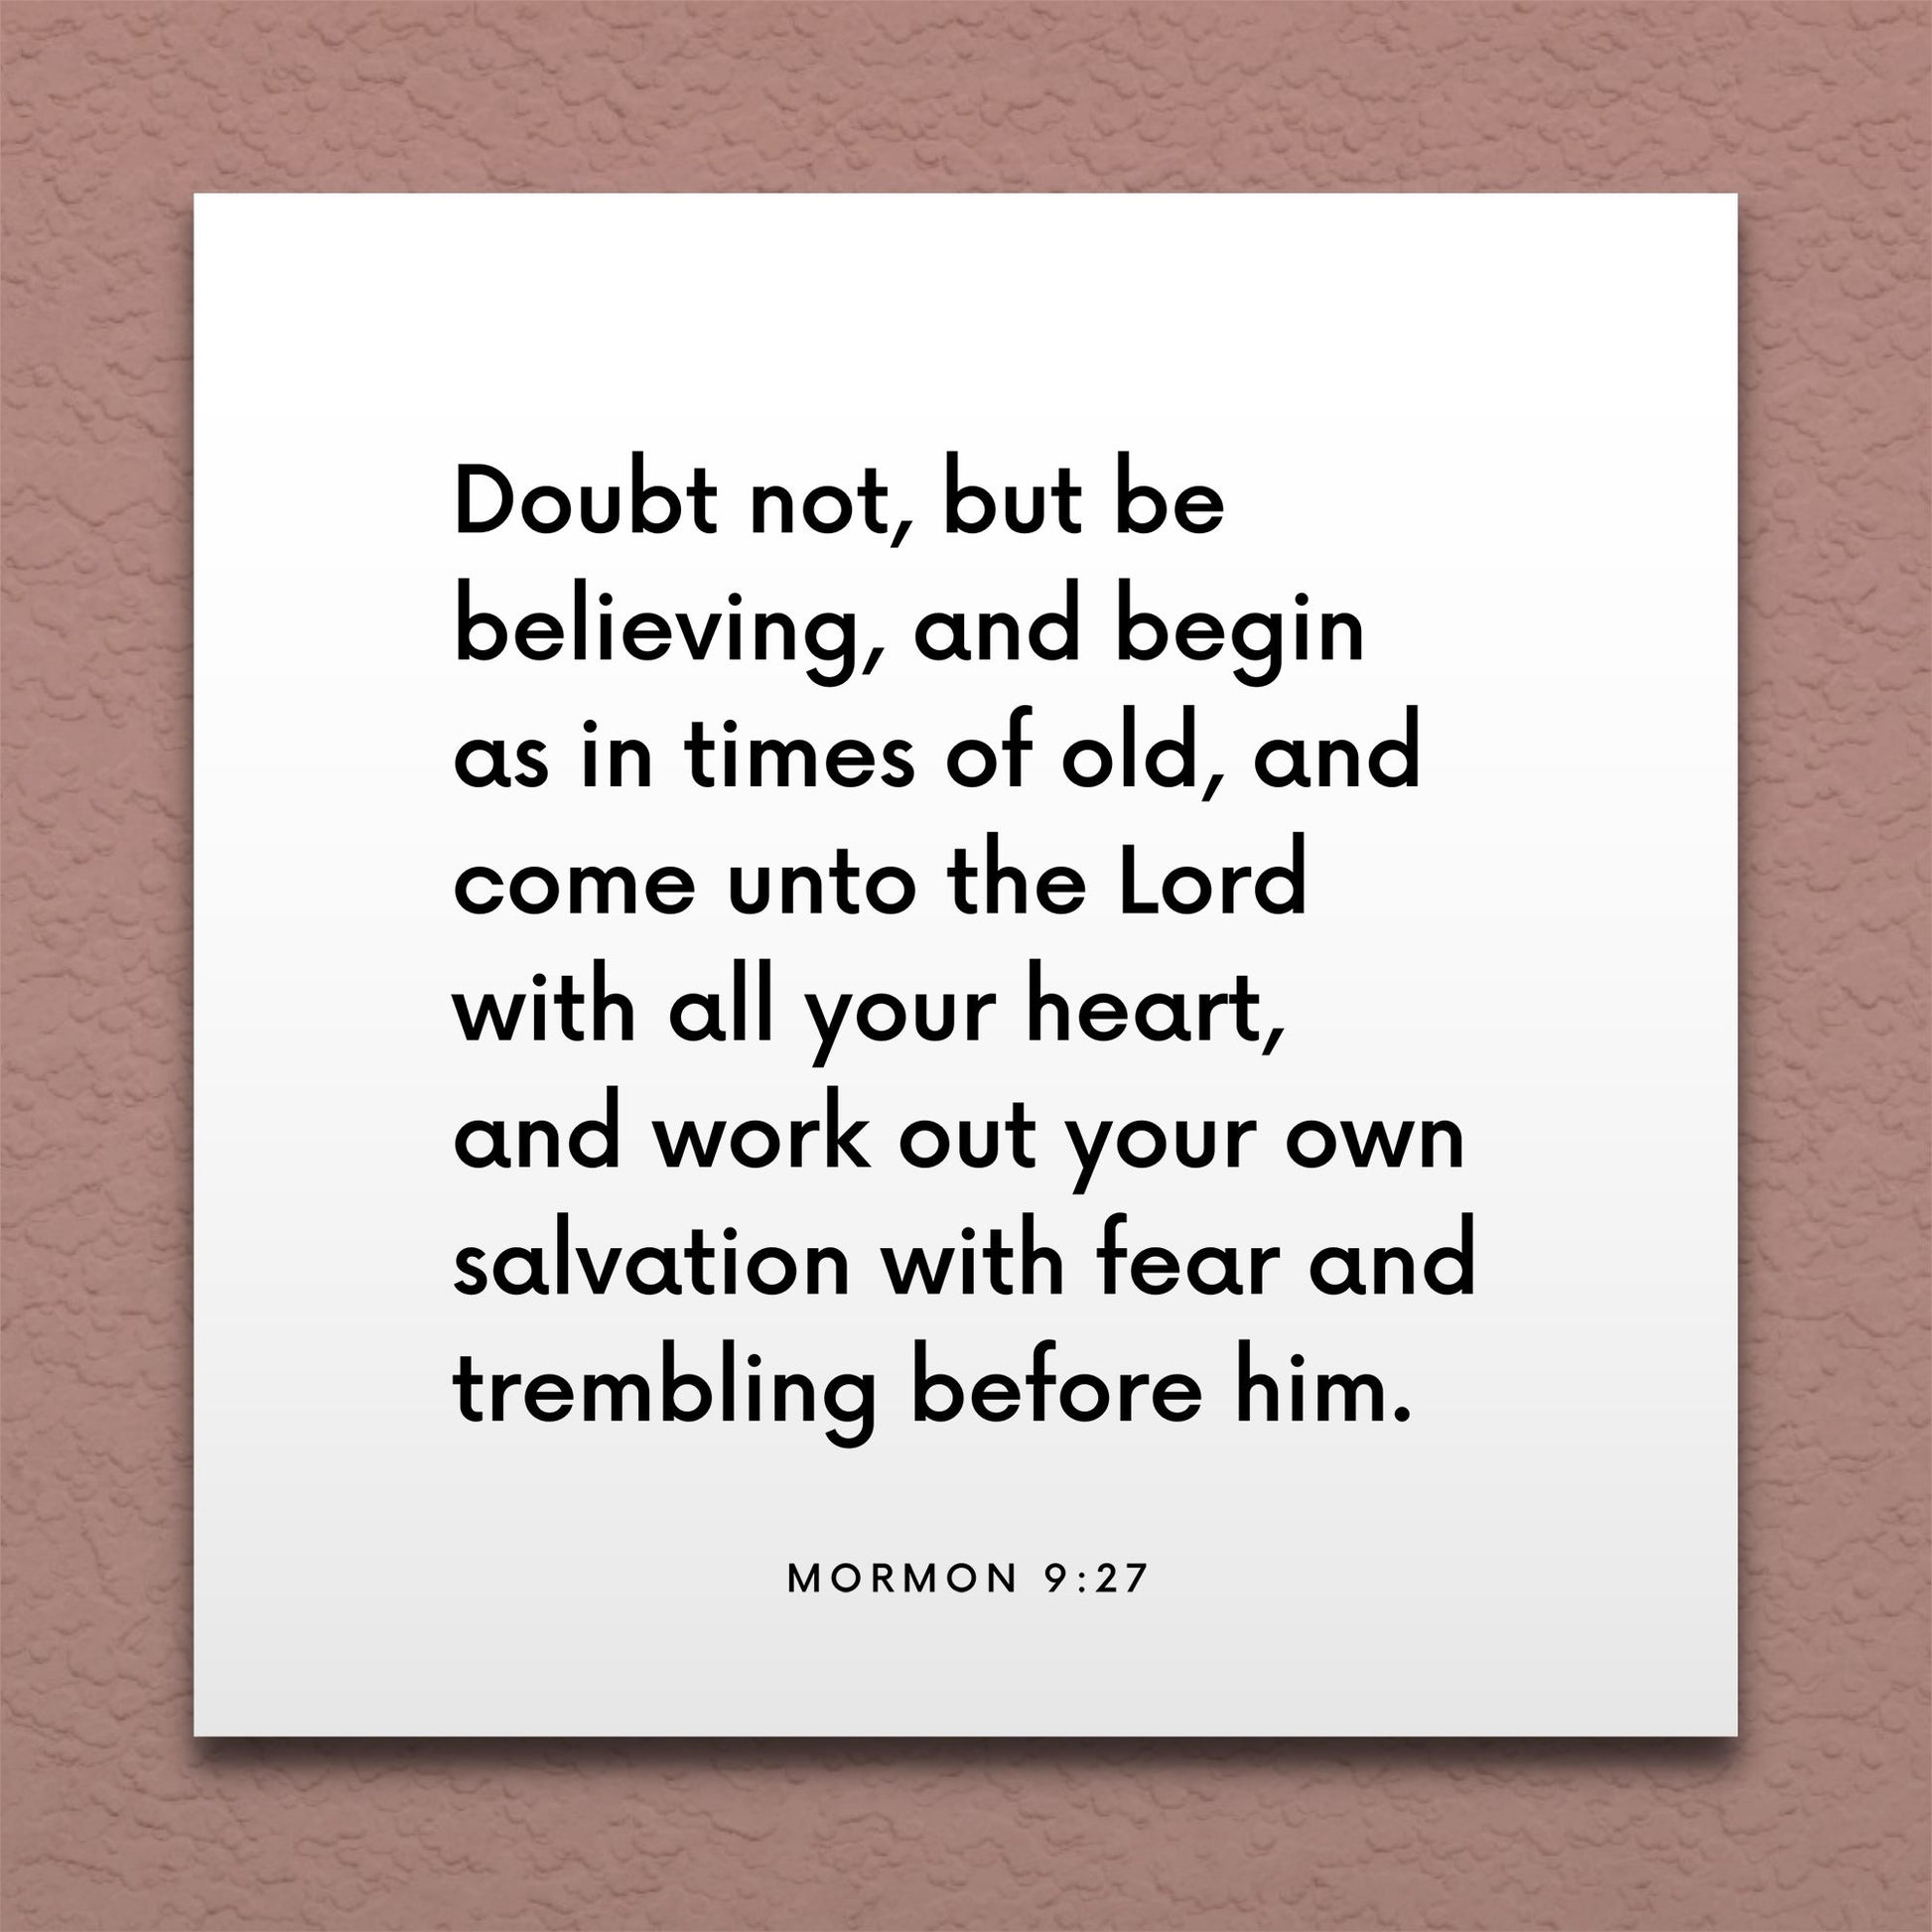 Wall-mounted scripture tile for Mormon 9:27 - "Doubt not, but be believing"